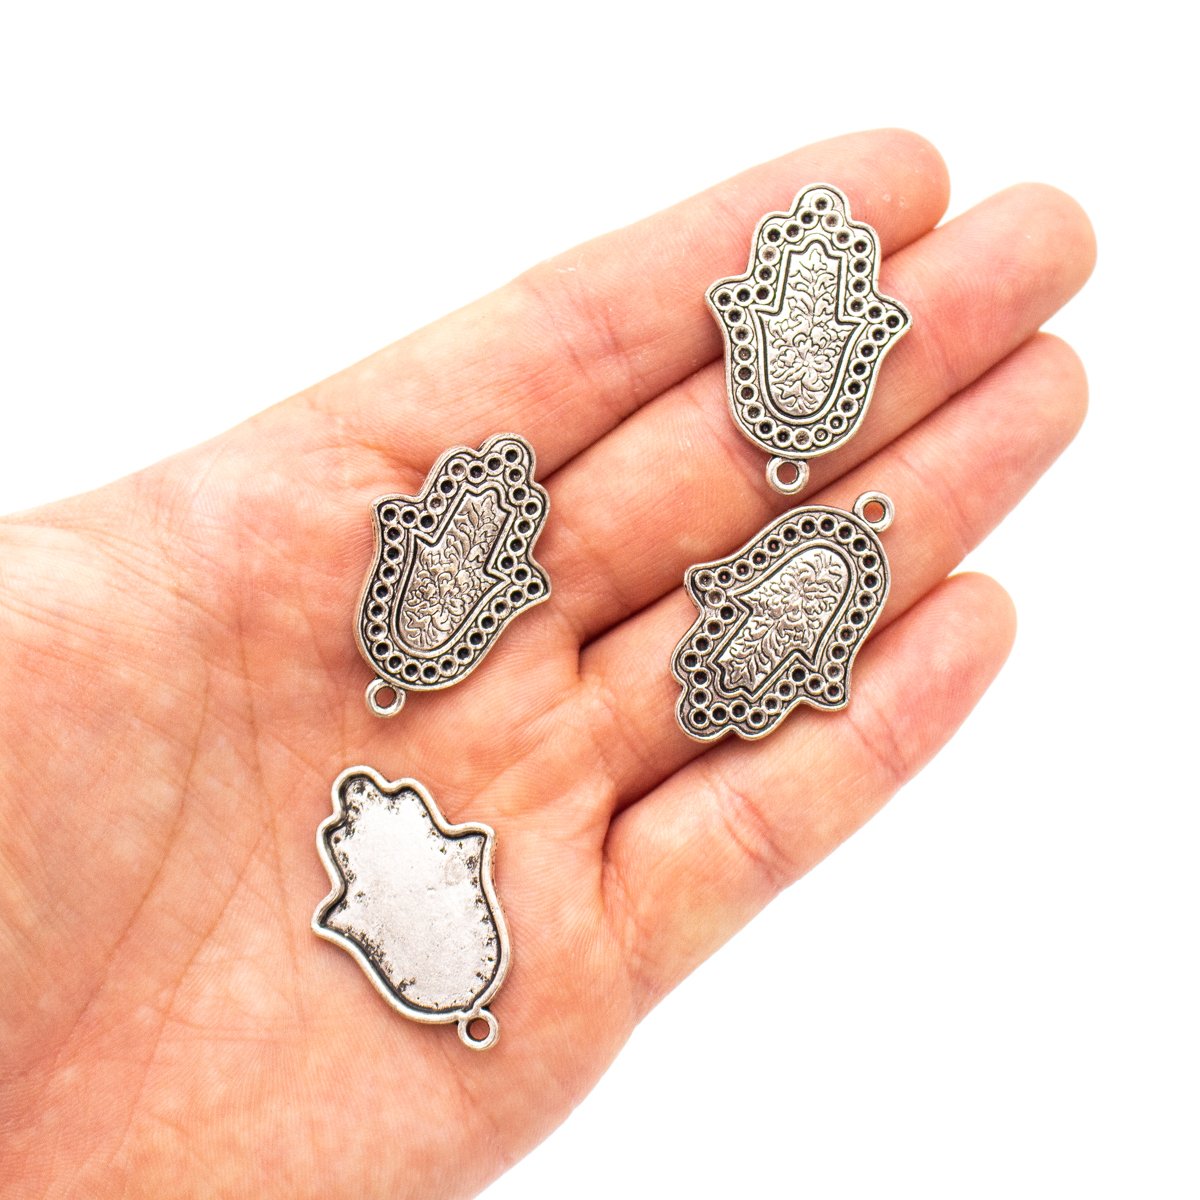 10Pcs s 23mm*35mm Antique Silver Hand of God pendant jewelry supplies jewelry finding D-3-435